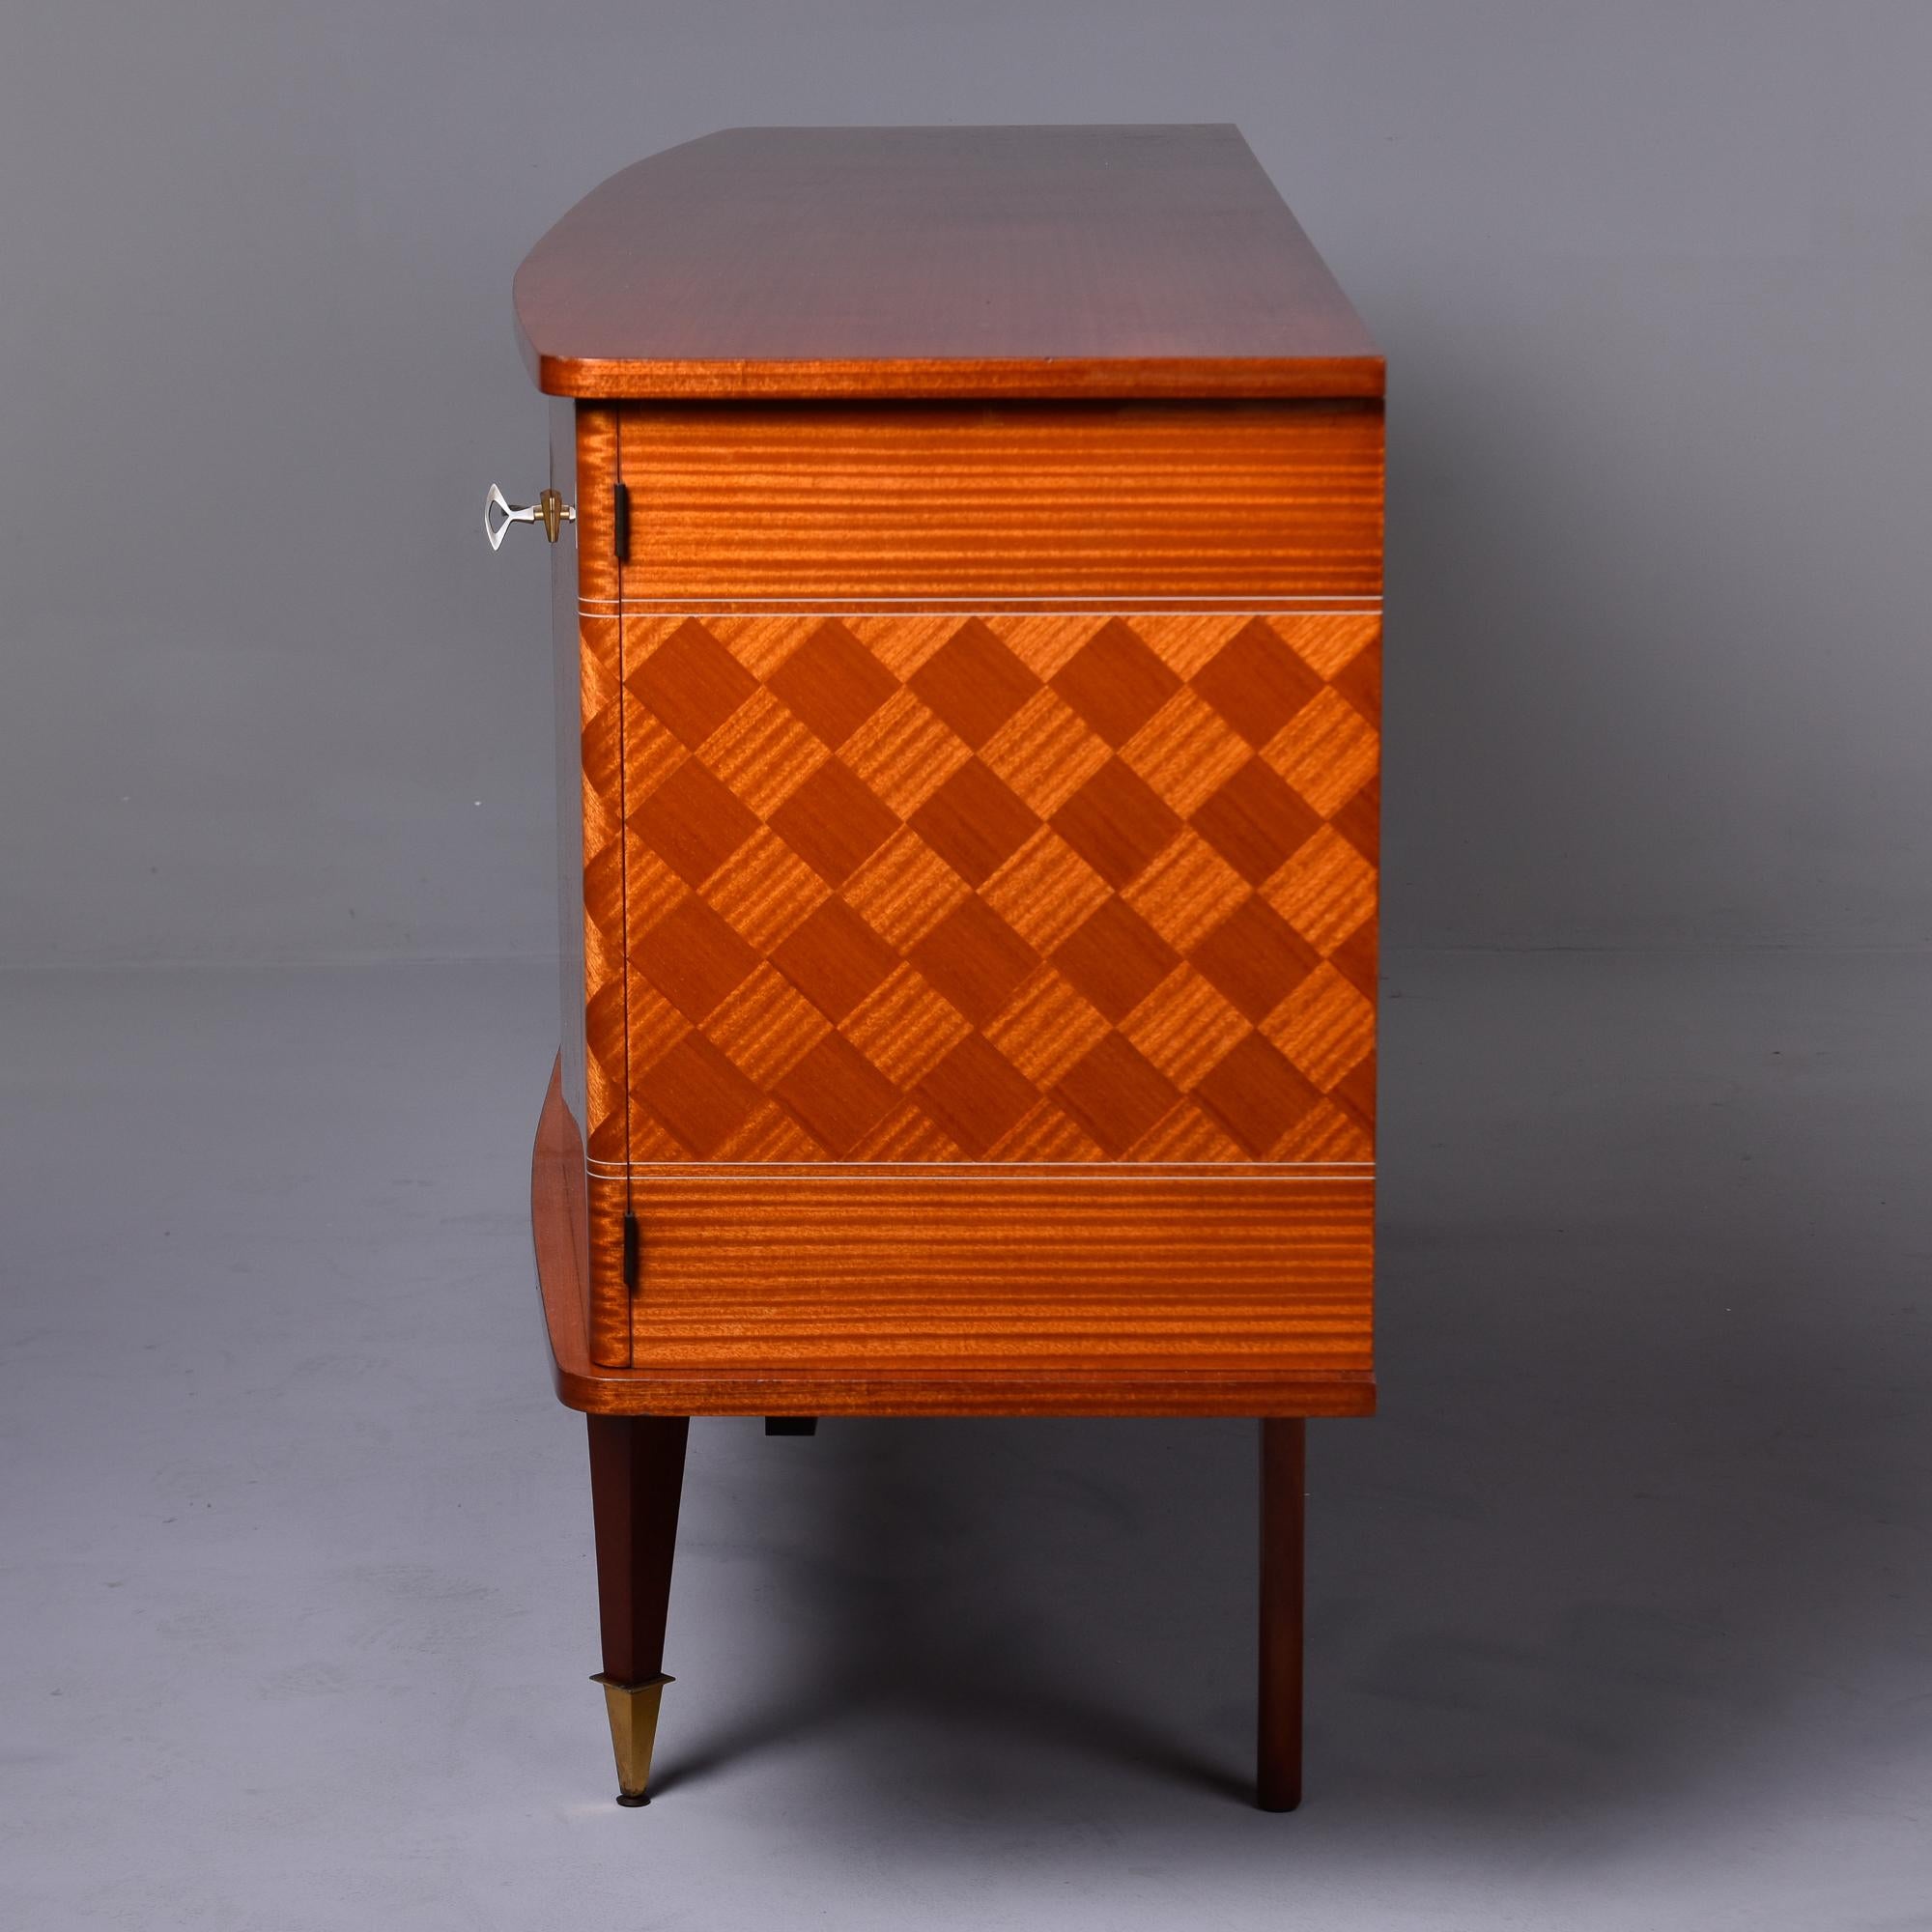 French Art Deco Mahogany Buffet Sideboard Credenza with Checkerboard Parquetry For Sale 4